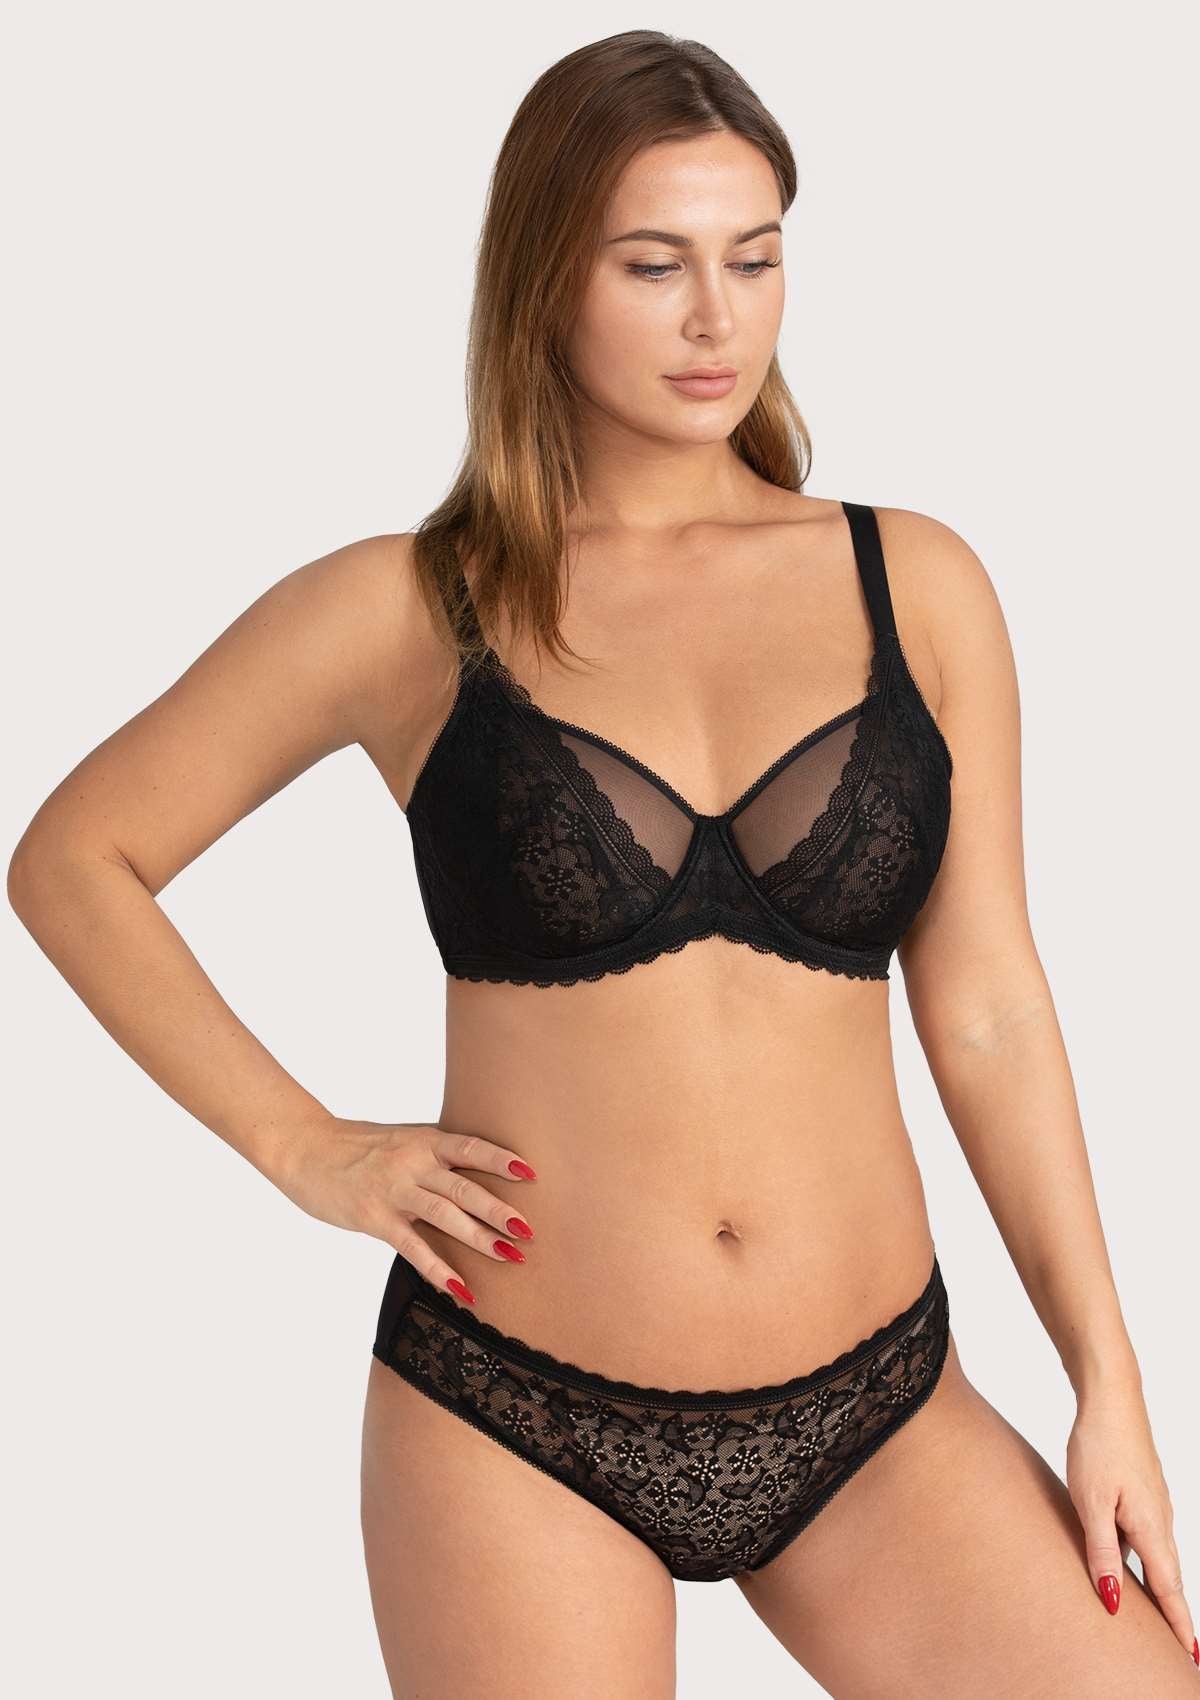 HSIA Anemone Lace Bra And Panties: Back Support Wired Bra - Black / 42 / D